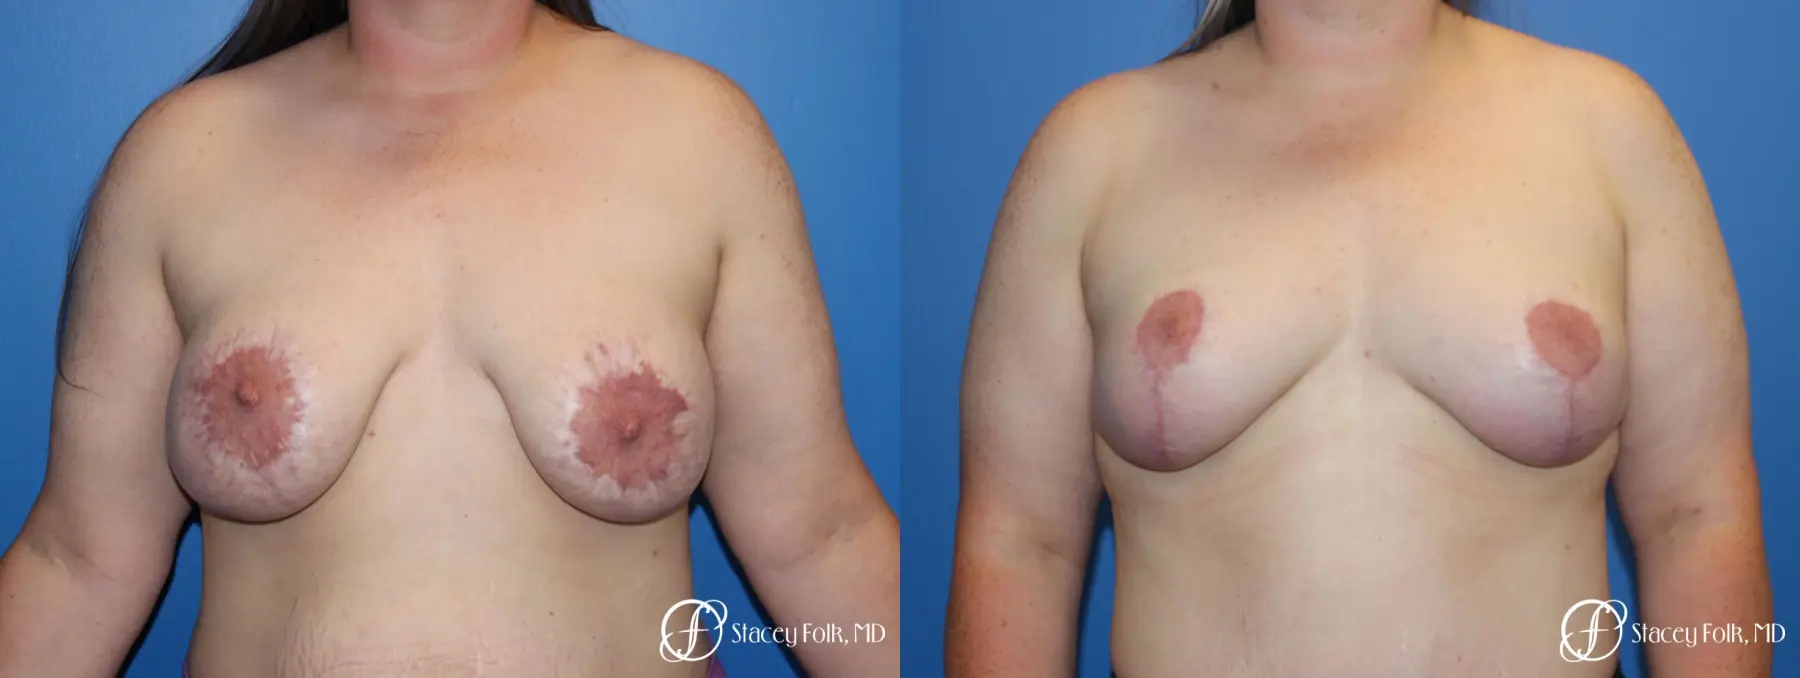 Breast Lift (Mastopexy) - Before and After